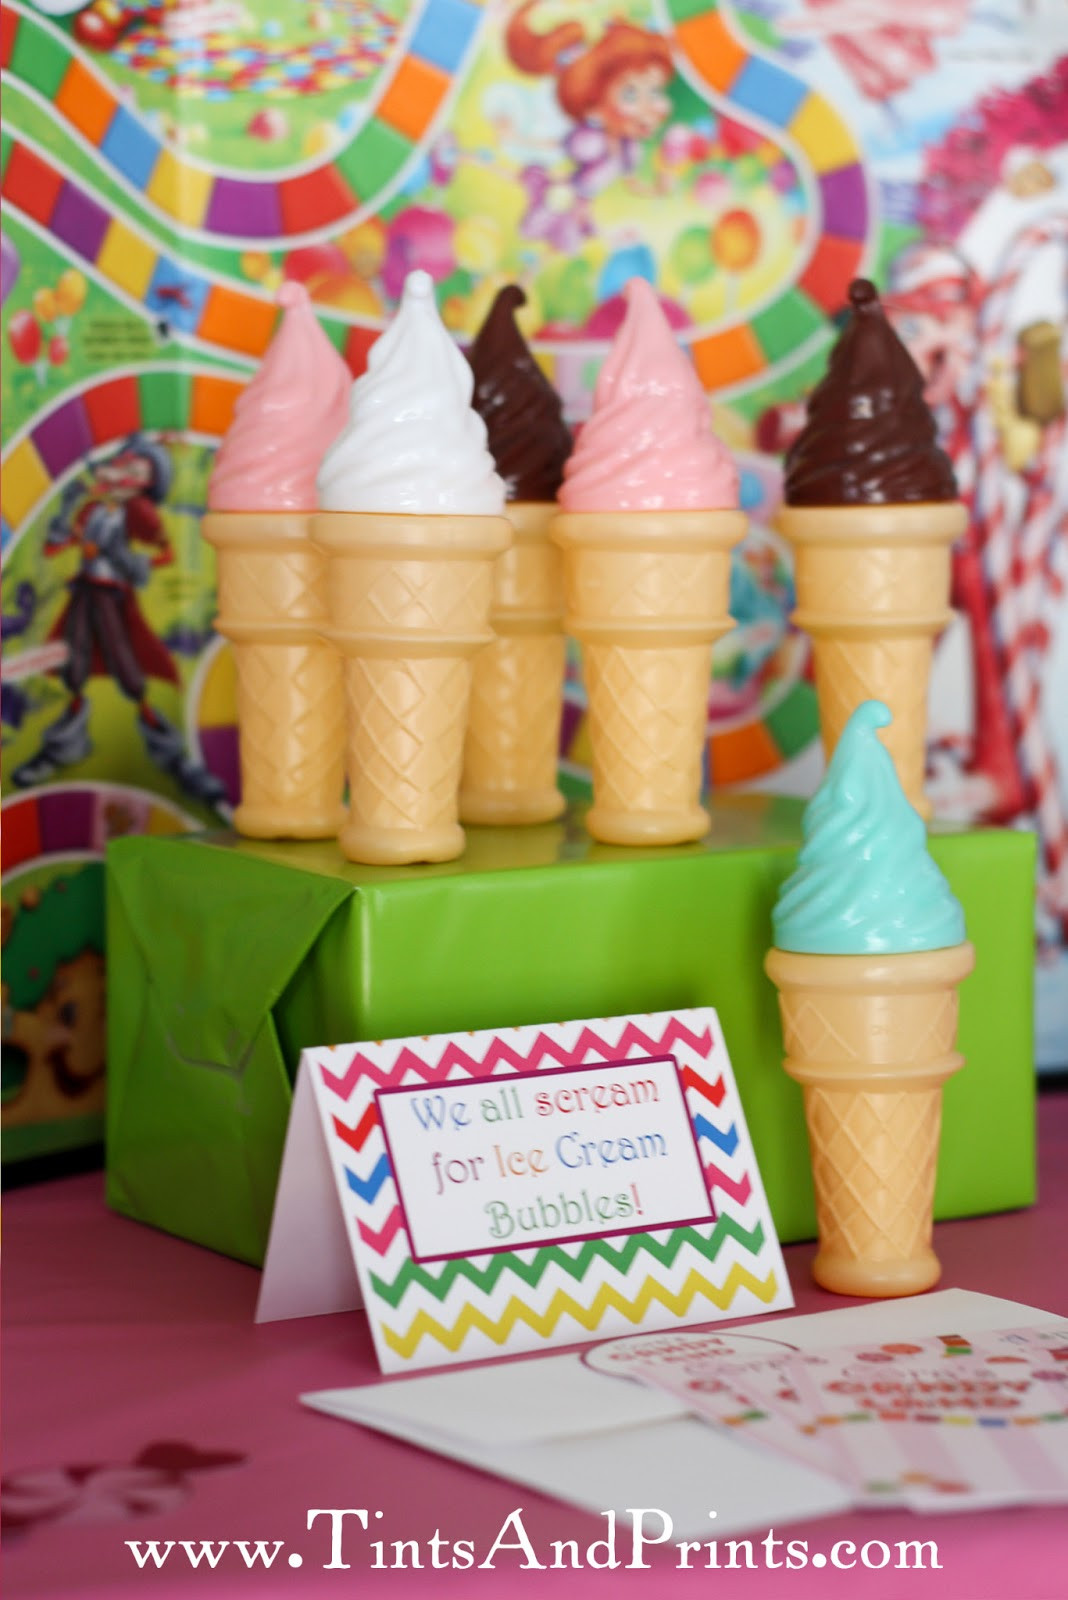 Candyland Birthday Party Ideas
 Chevron Candyland Inspired Birthday Party